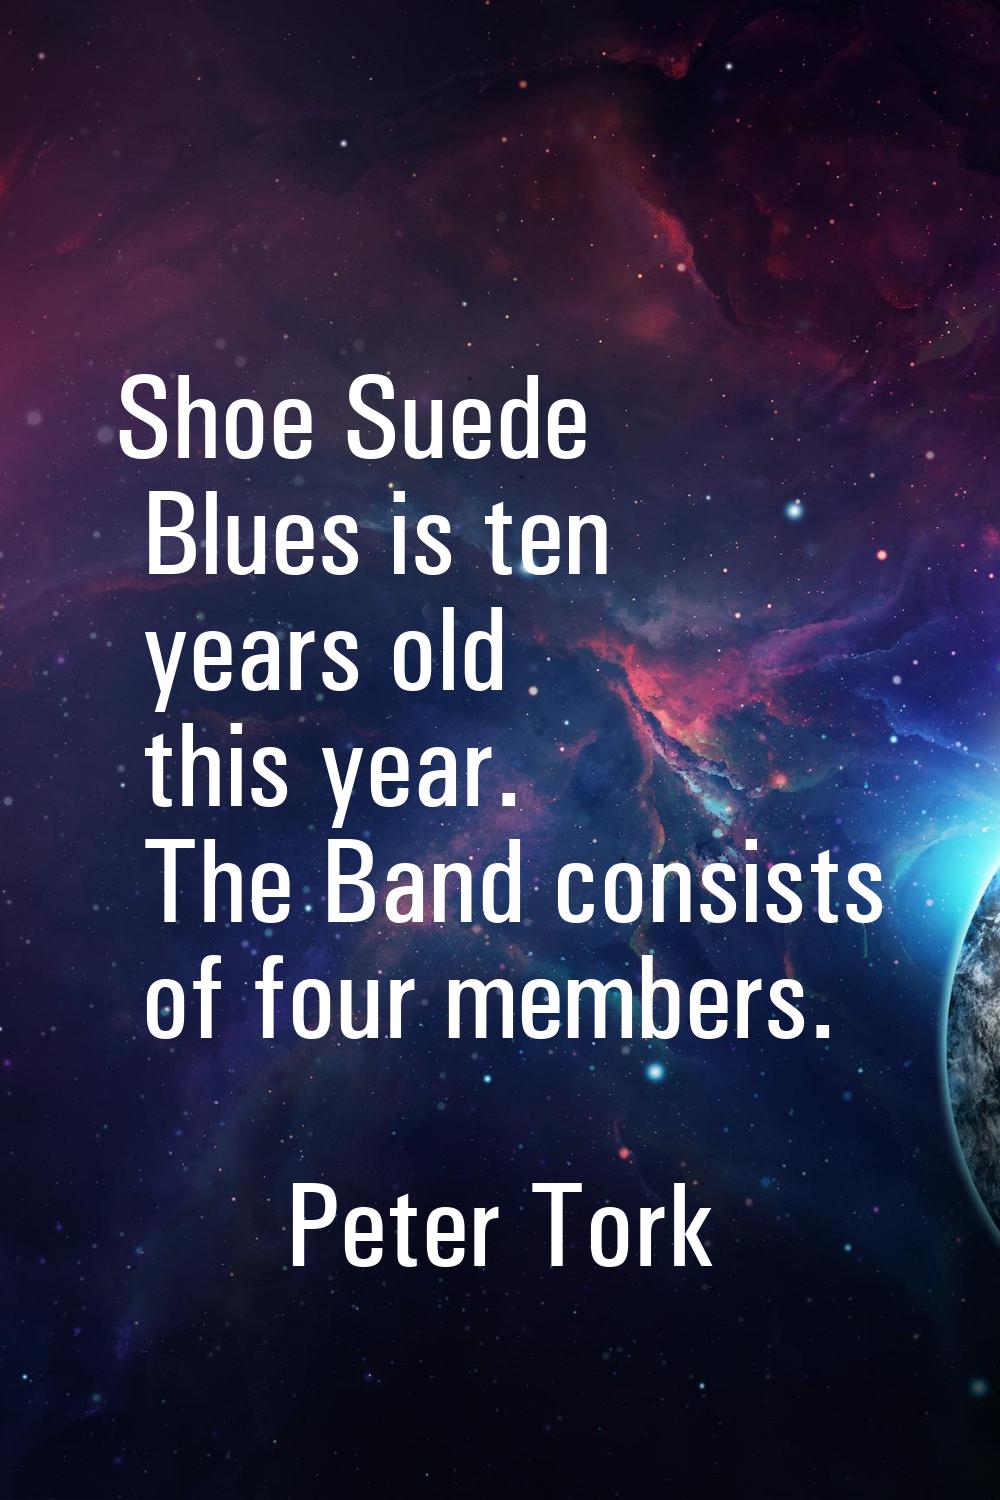 Shoe Suede Blues is ten years old this year. The Band consists of four members.